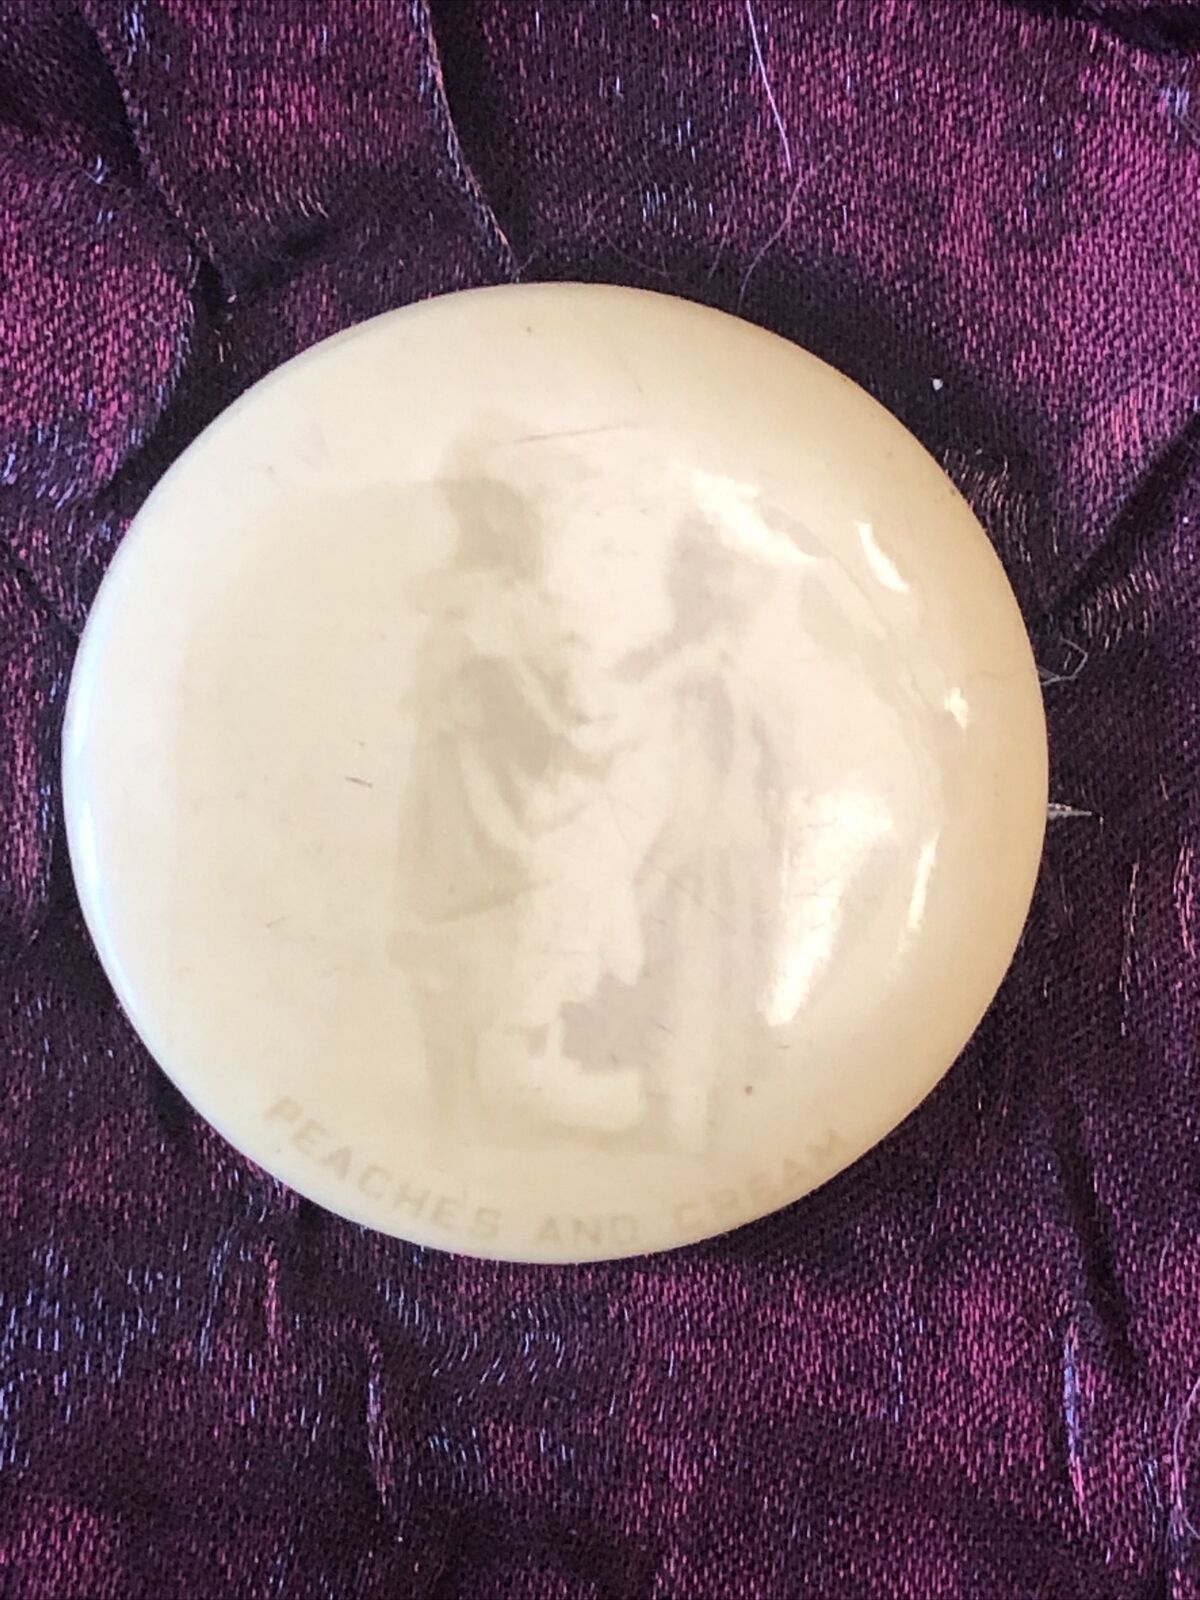 1890s Whitehead And Hoag Advertising Button— Cameo Pepsin Gum—Peaches And Cream